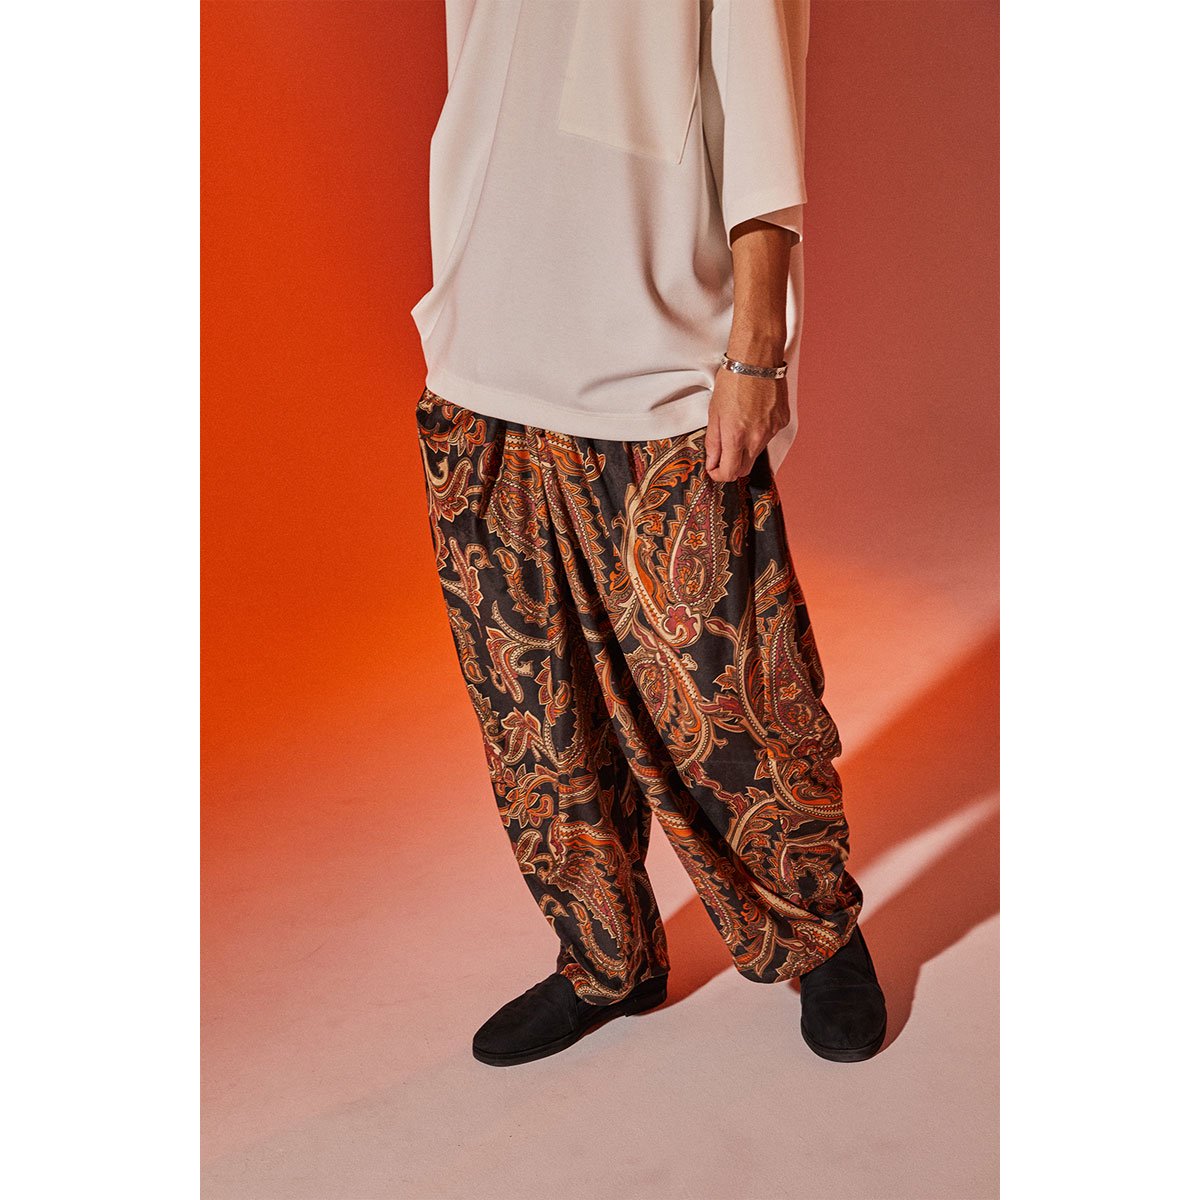 PAISLEY VELOR BALLOON PANTS - TIGHTBOOTH PRODUCTION